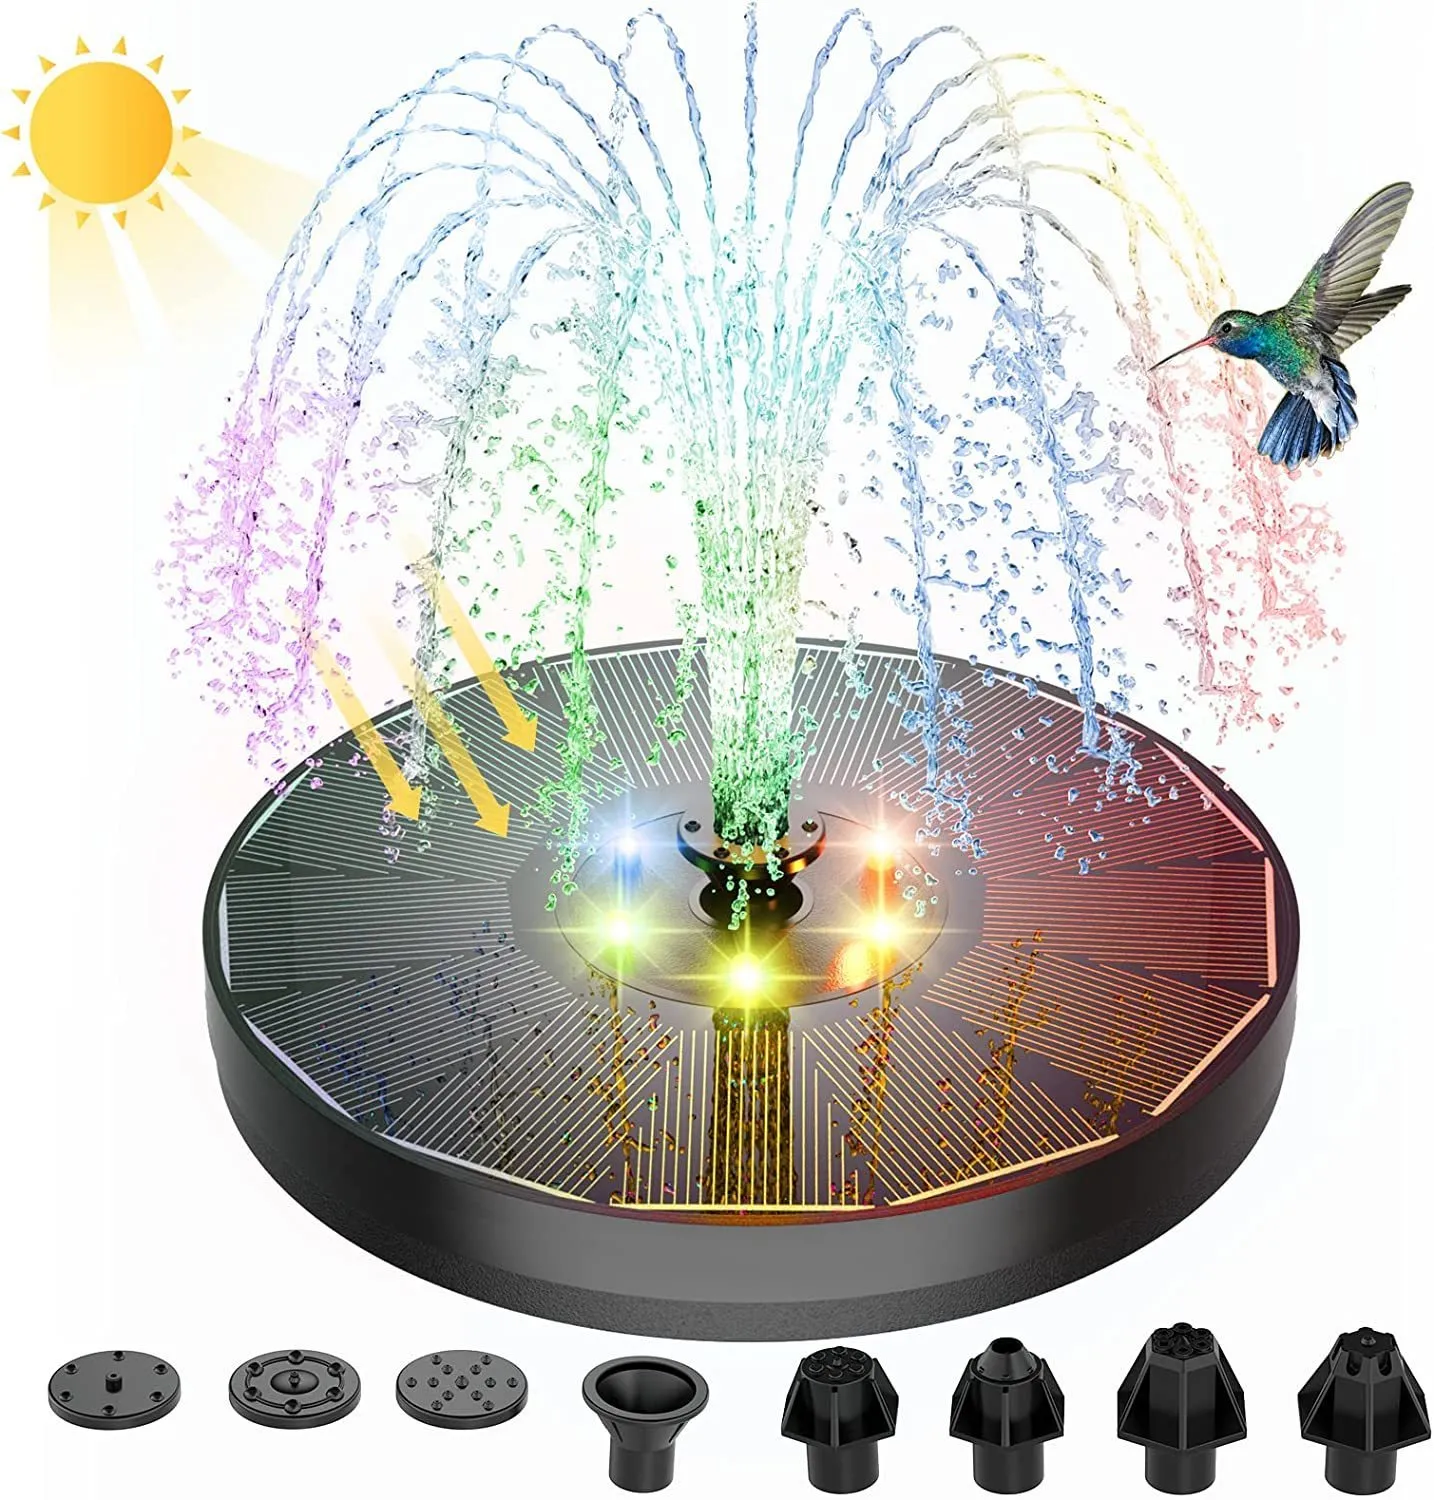 Garden Decorations 1 option Solar Fountain Water Pump with color LED Lights for Bird Bath 3W with 7 Nozzles 4 Fixers Floating Garden Pond Tank 230606